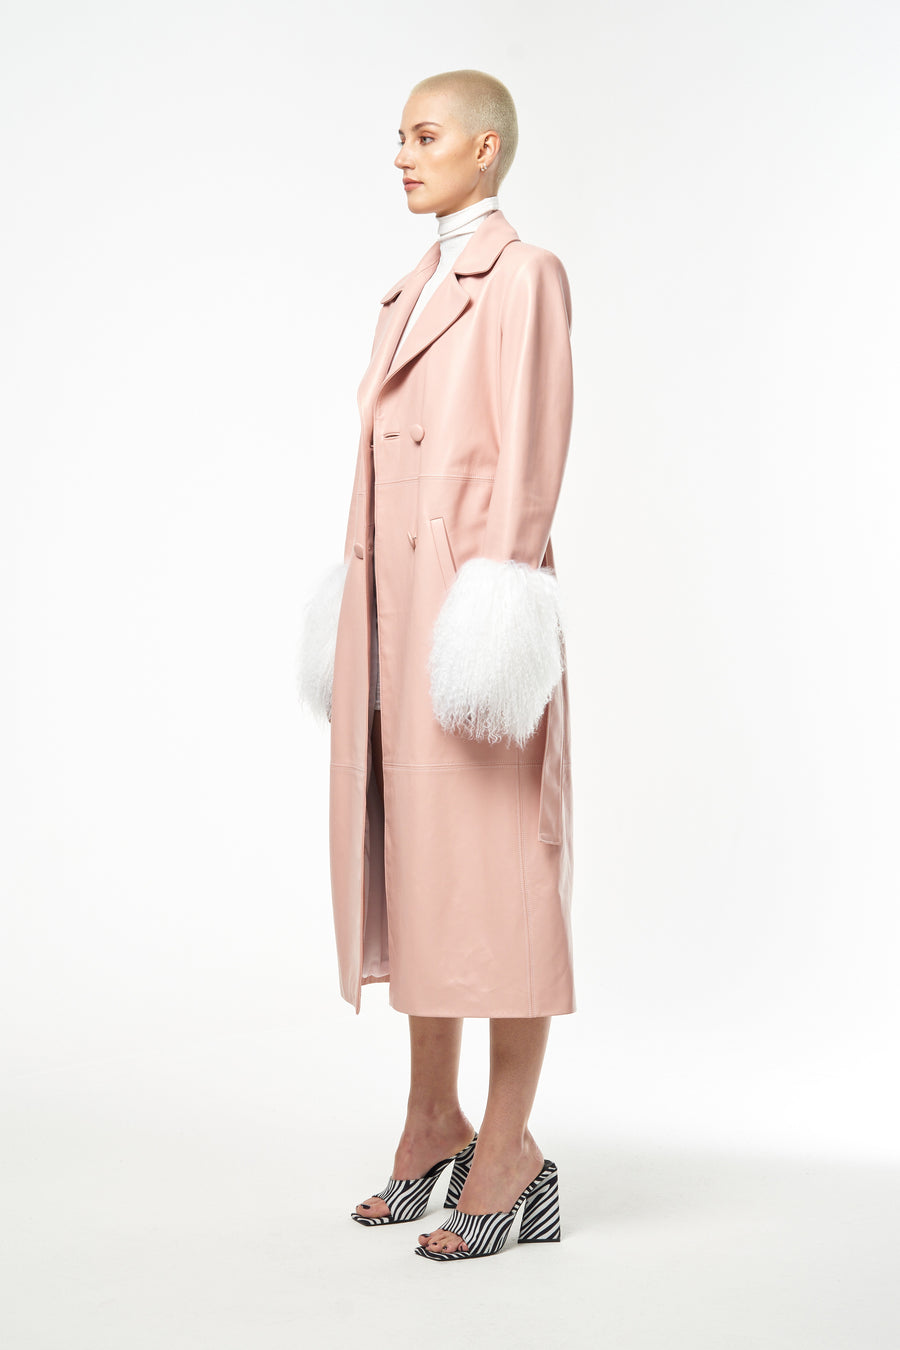 Long Pink Leather Jacket With White Fur Cuffs on Sleeves